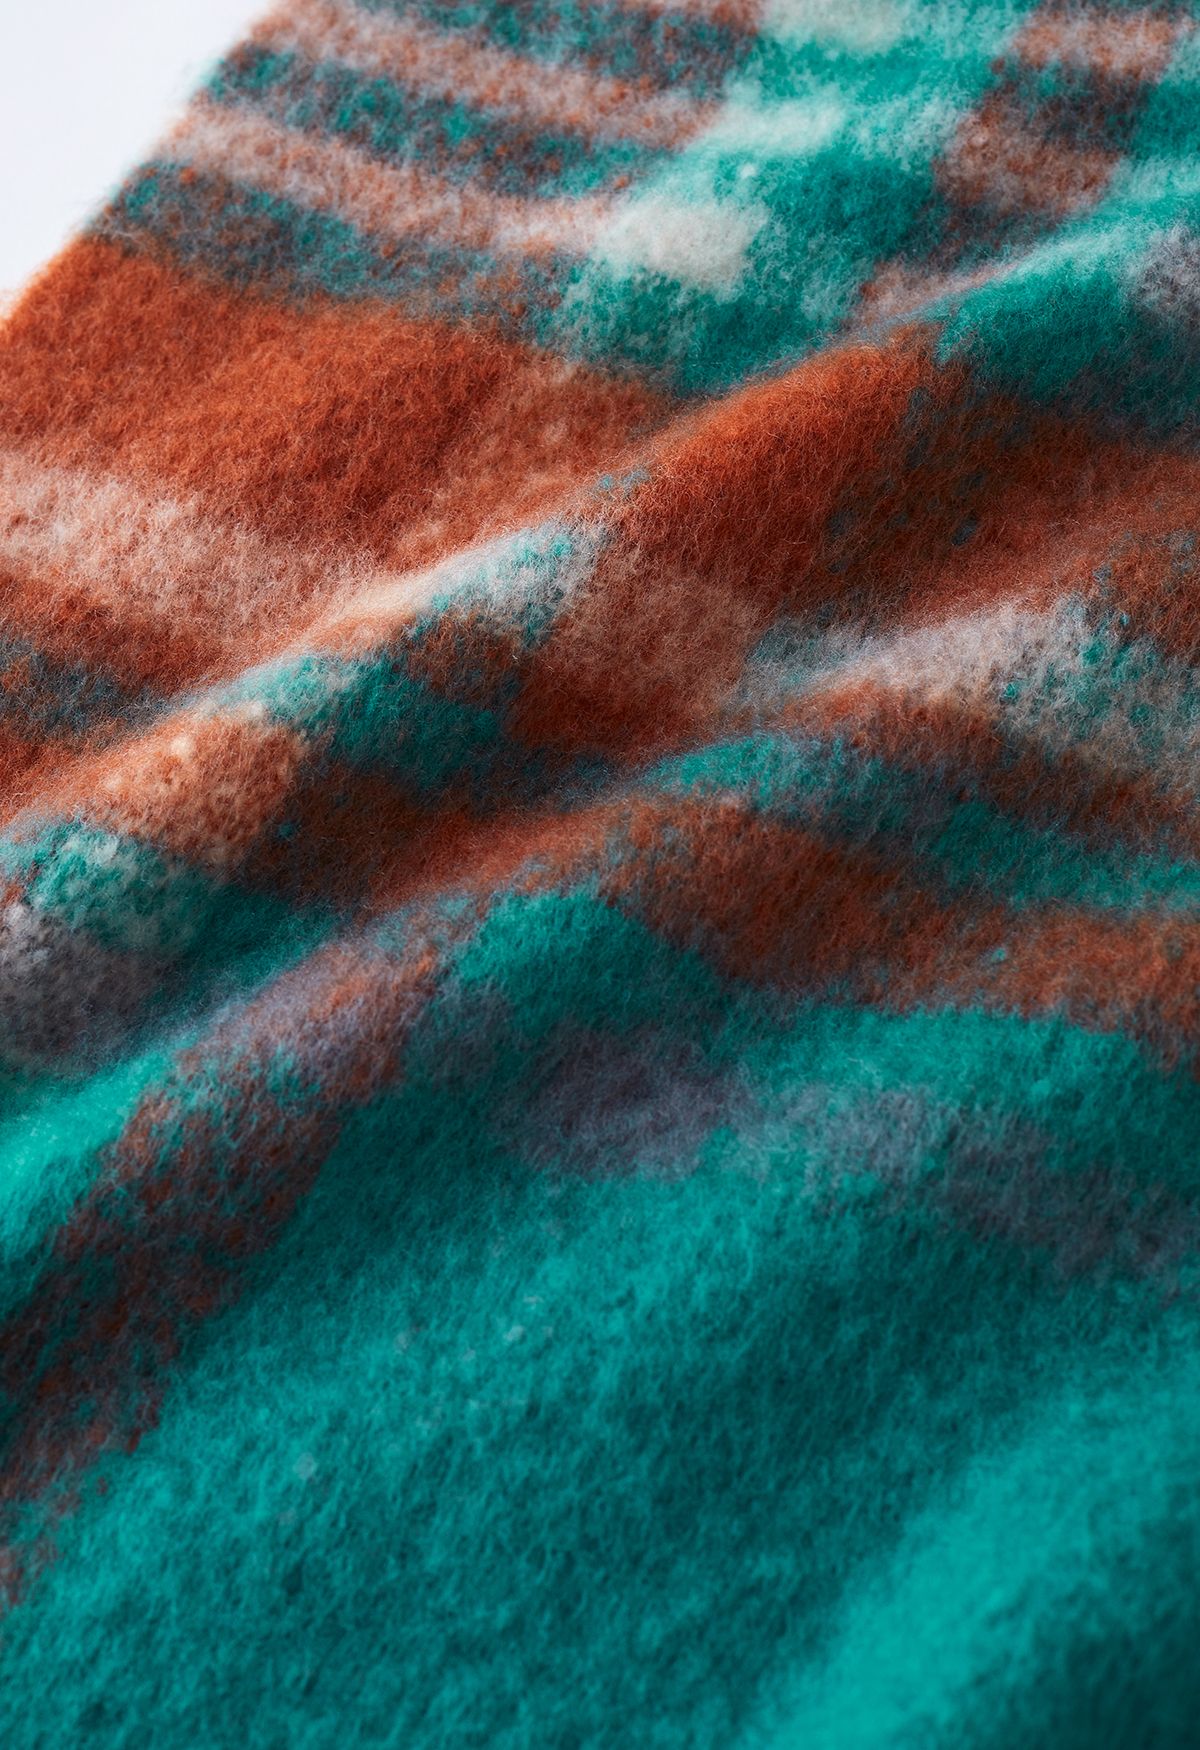 Fuzzy Mohair Plaid Pattern Scarf in Turquoise